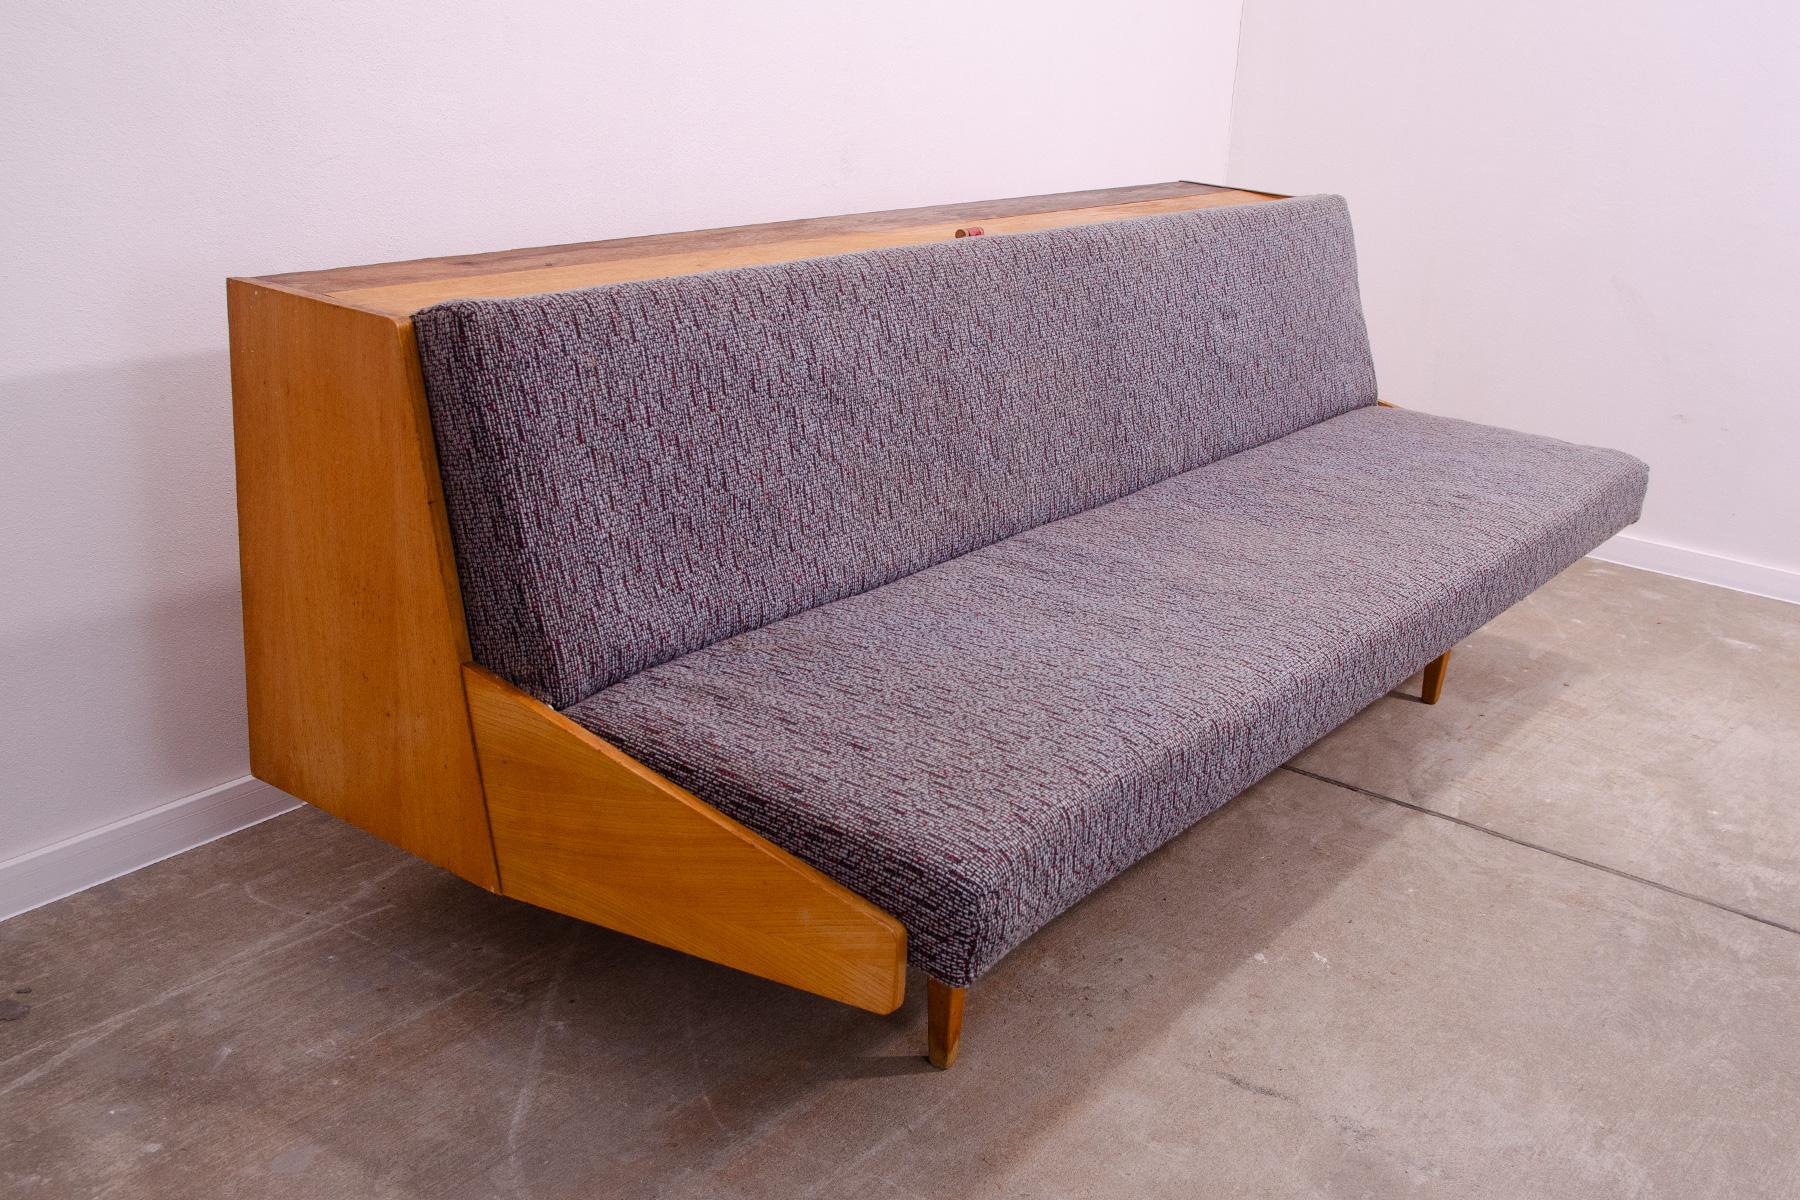 Midcentury Folding Sofabed by Tatra nabytok, 1970s, Czechoslovakia In Good Condition For Sale In Prague 8, CZ